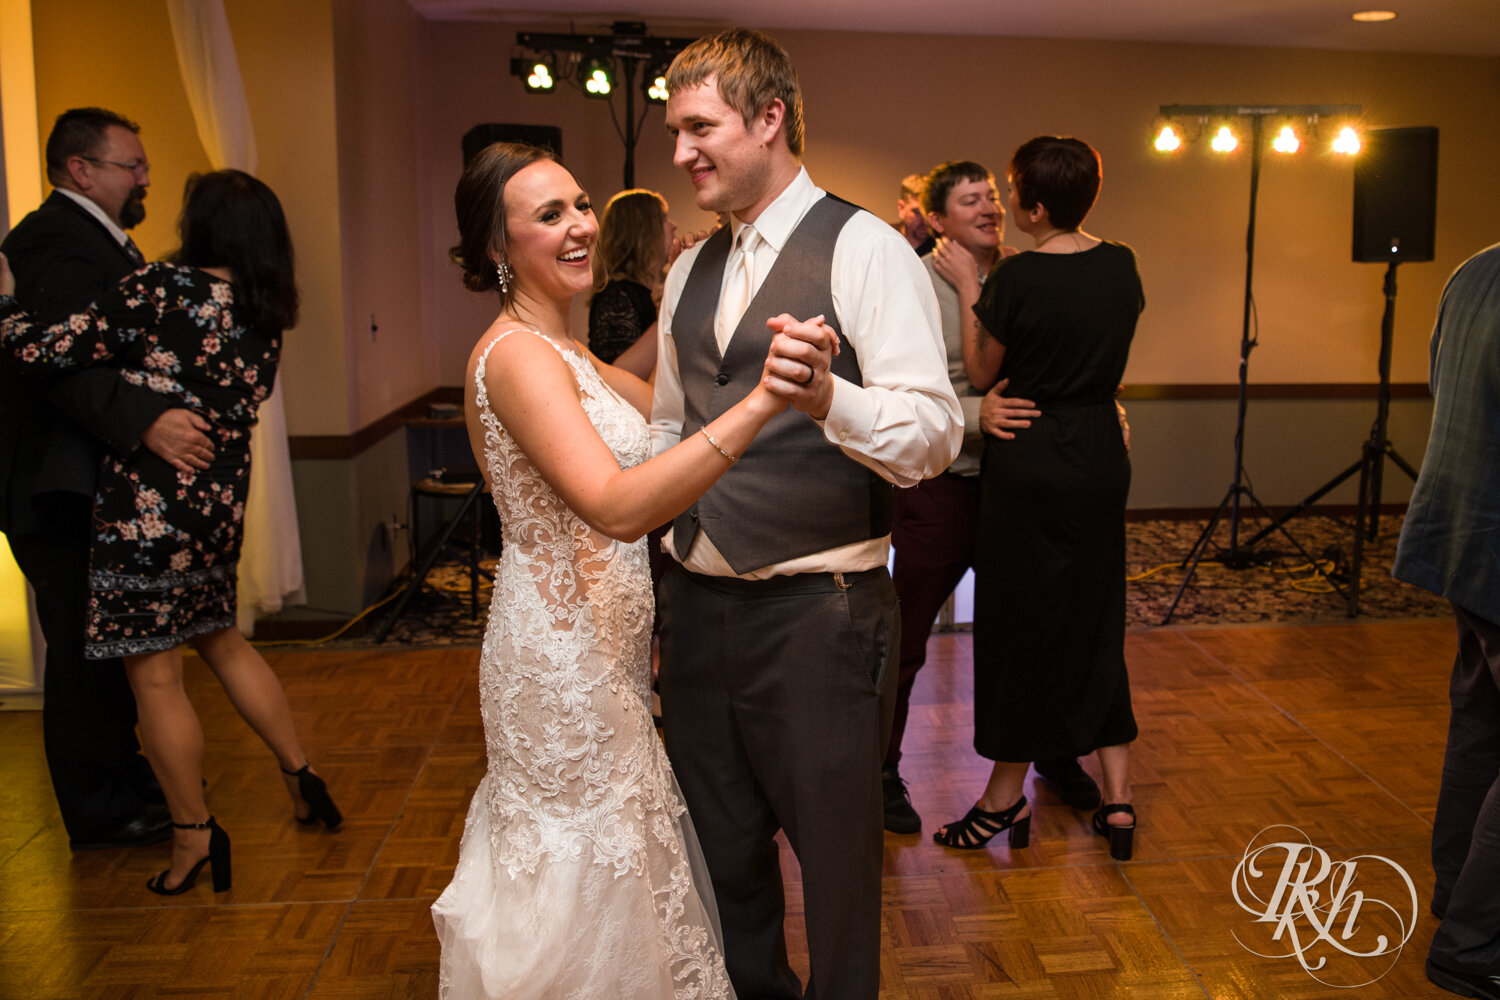 Bride and groom dance with guests at wedding reception on rainy day at The Wilds Golf Club in Prior Lake, Minnesota.